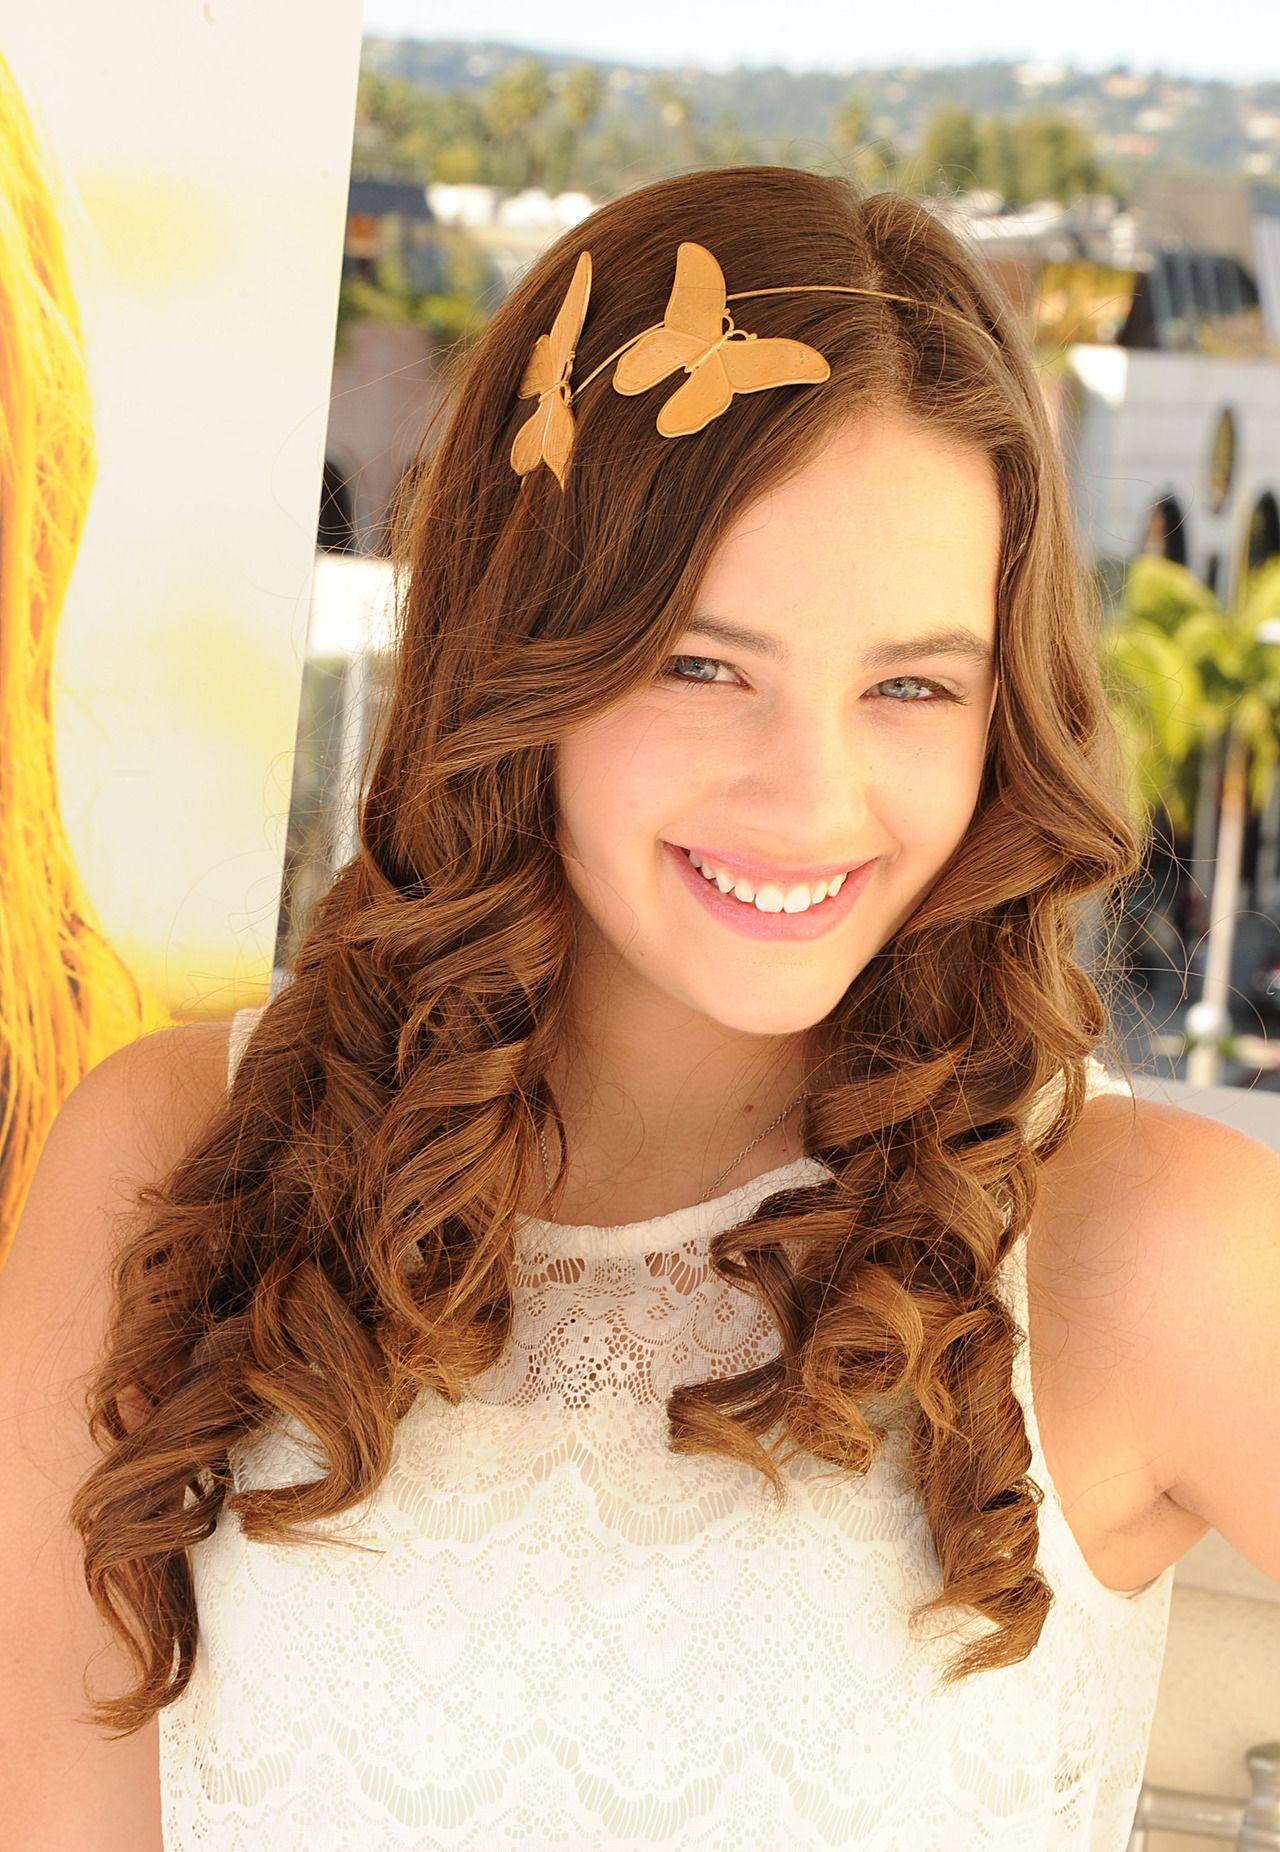 Mary Mouser- love her dress and headband!. My clothing